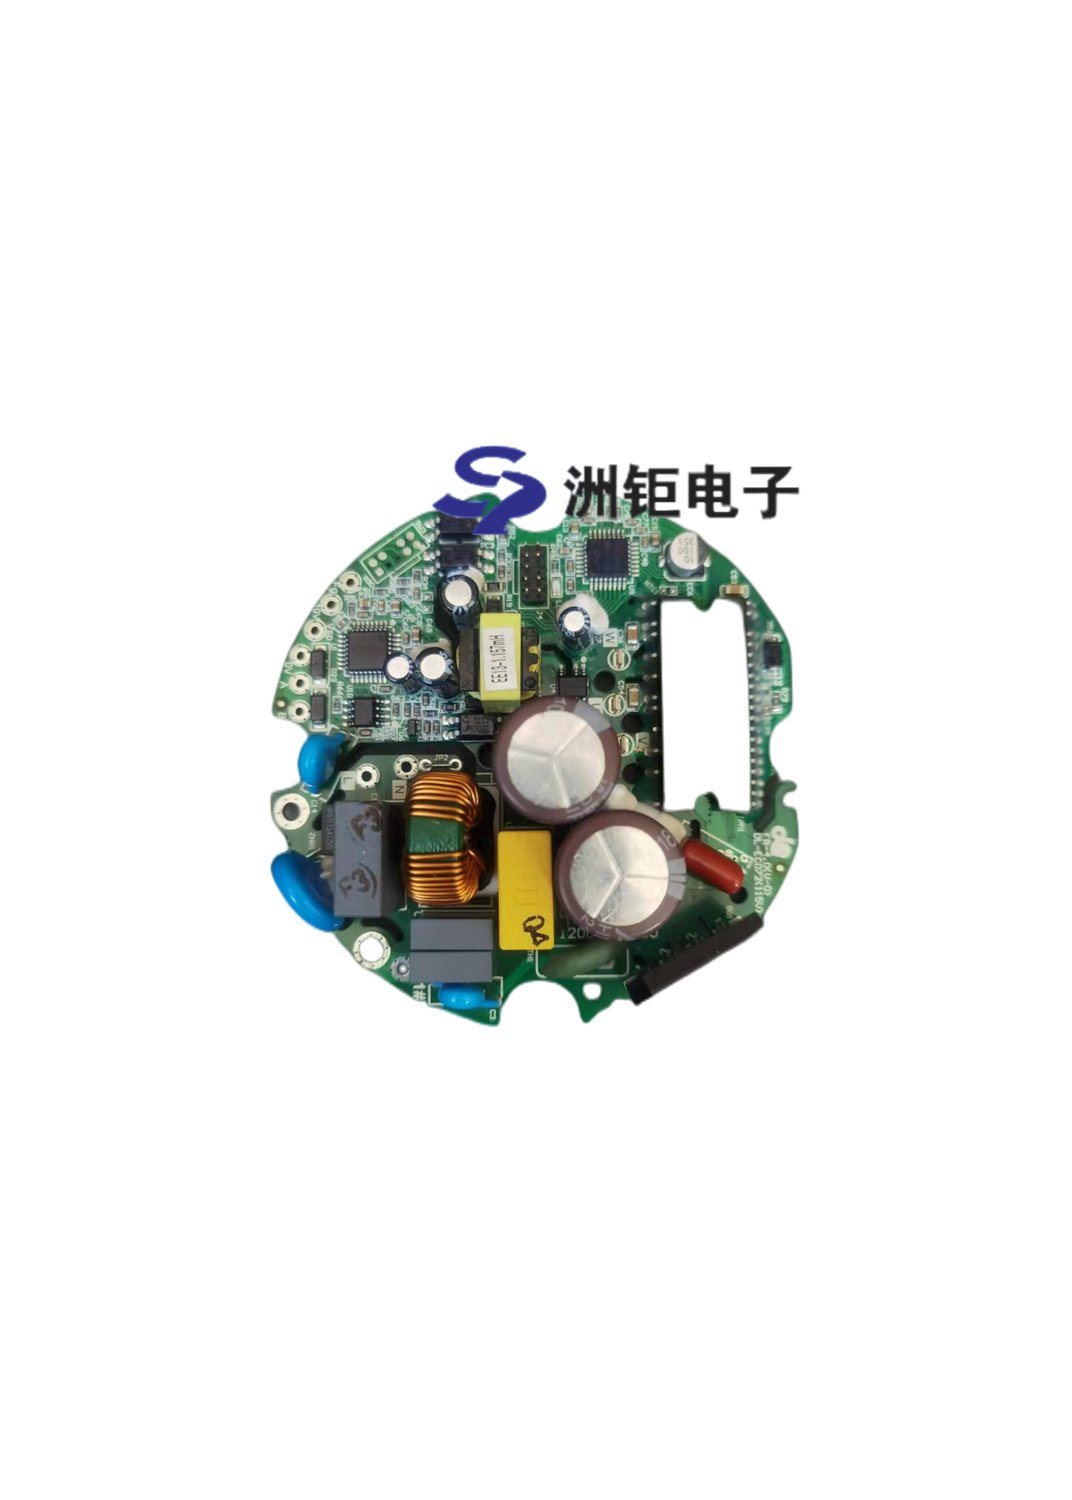 (170W-115V) Driver <font color='red'>Board</font> by Sp Made in China